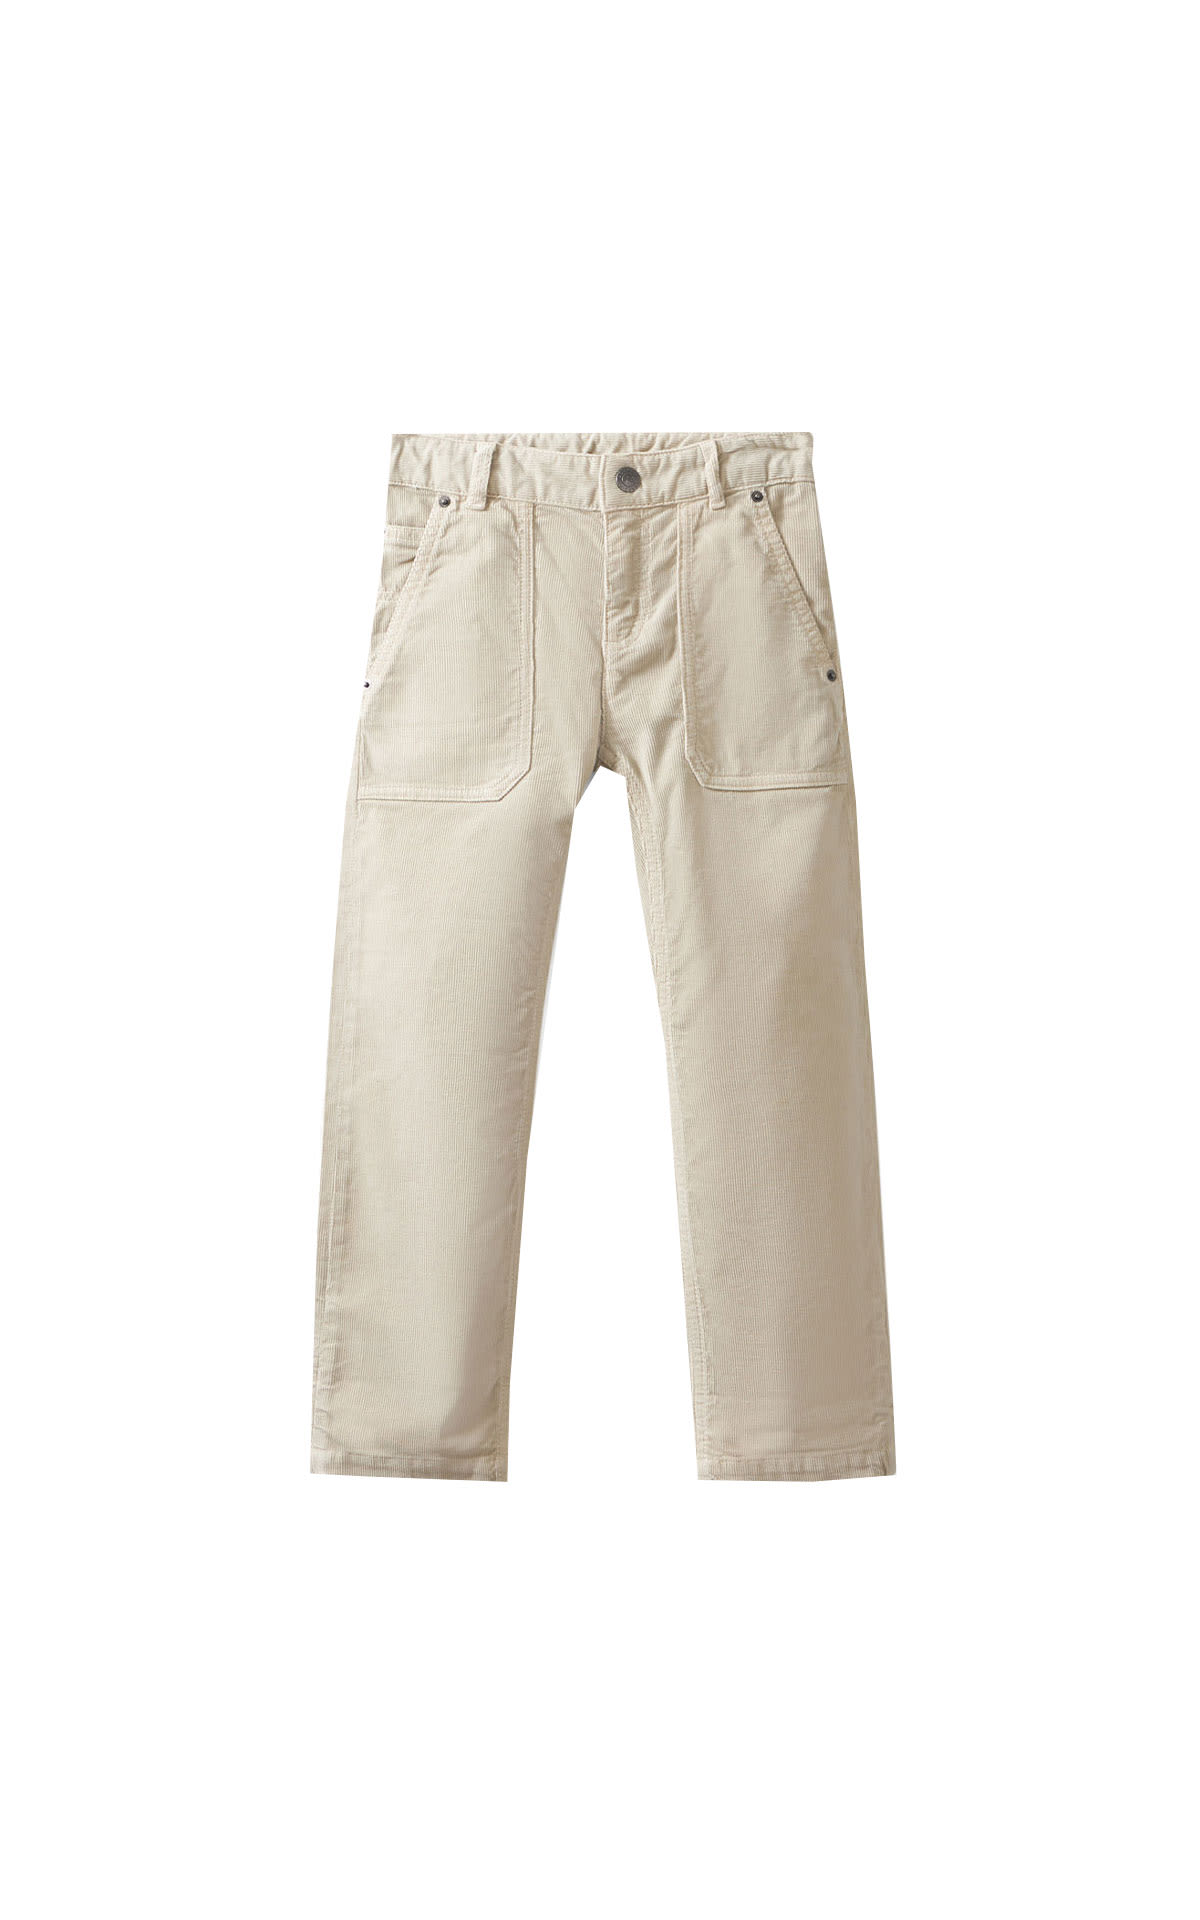 Bonpoint Boy's cord trousers from Bicester Village